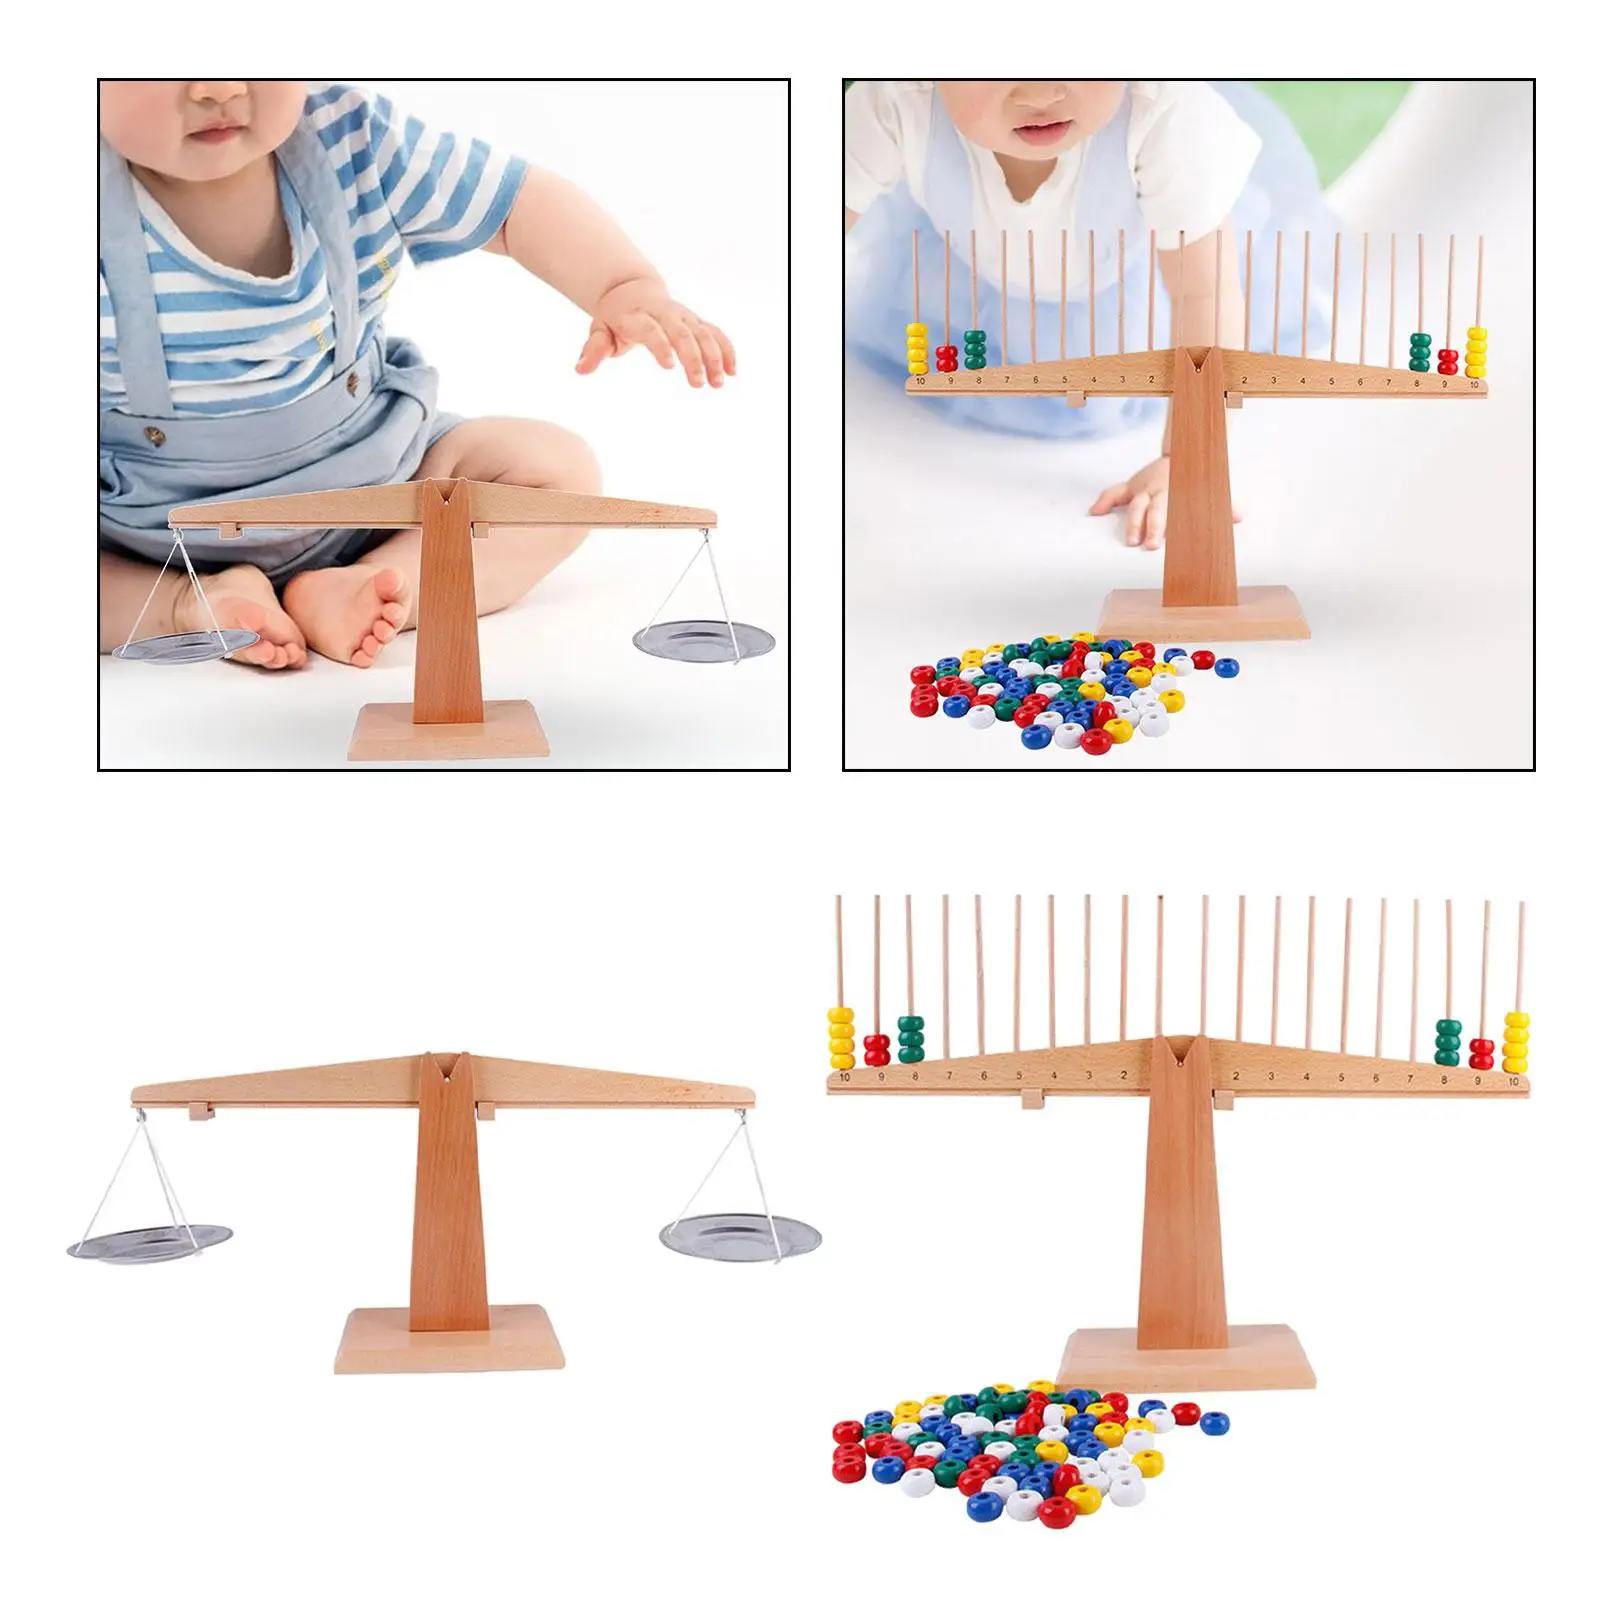 Wooden Balance Counting Toys Interactive Visual Perception Skills Educational Toy for Baby New Year Gift Ages 3 4 5 Year Old